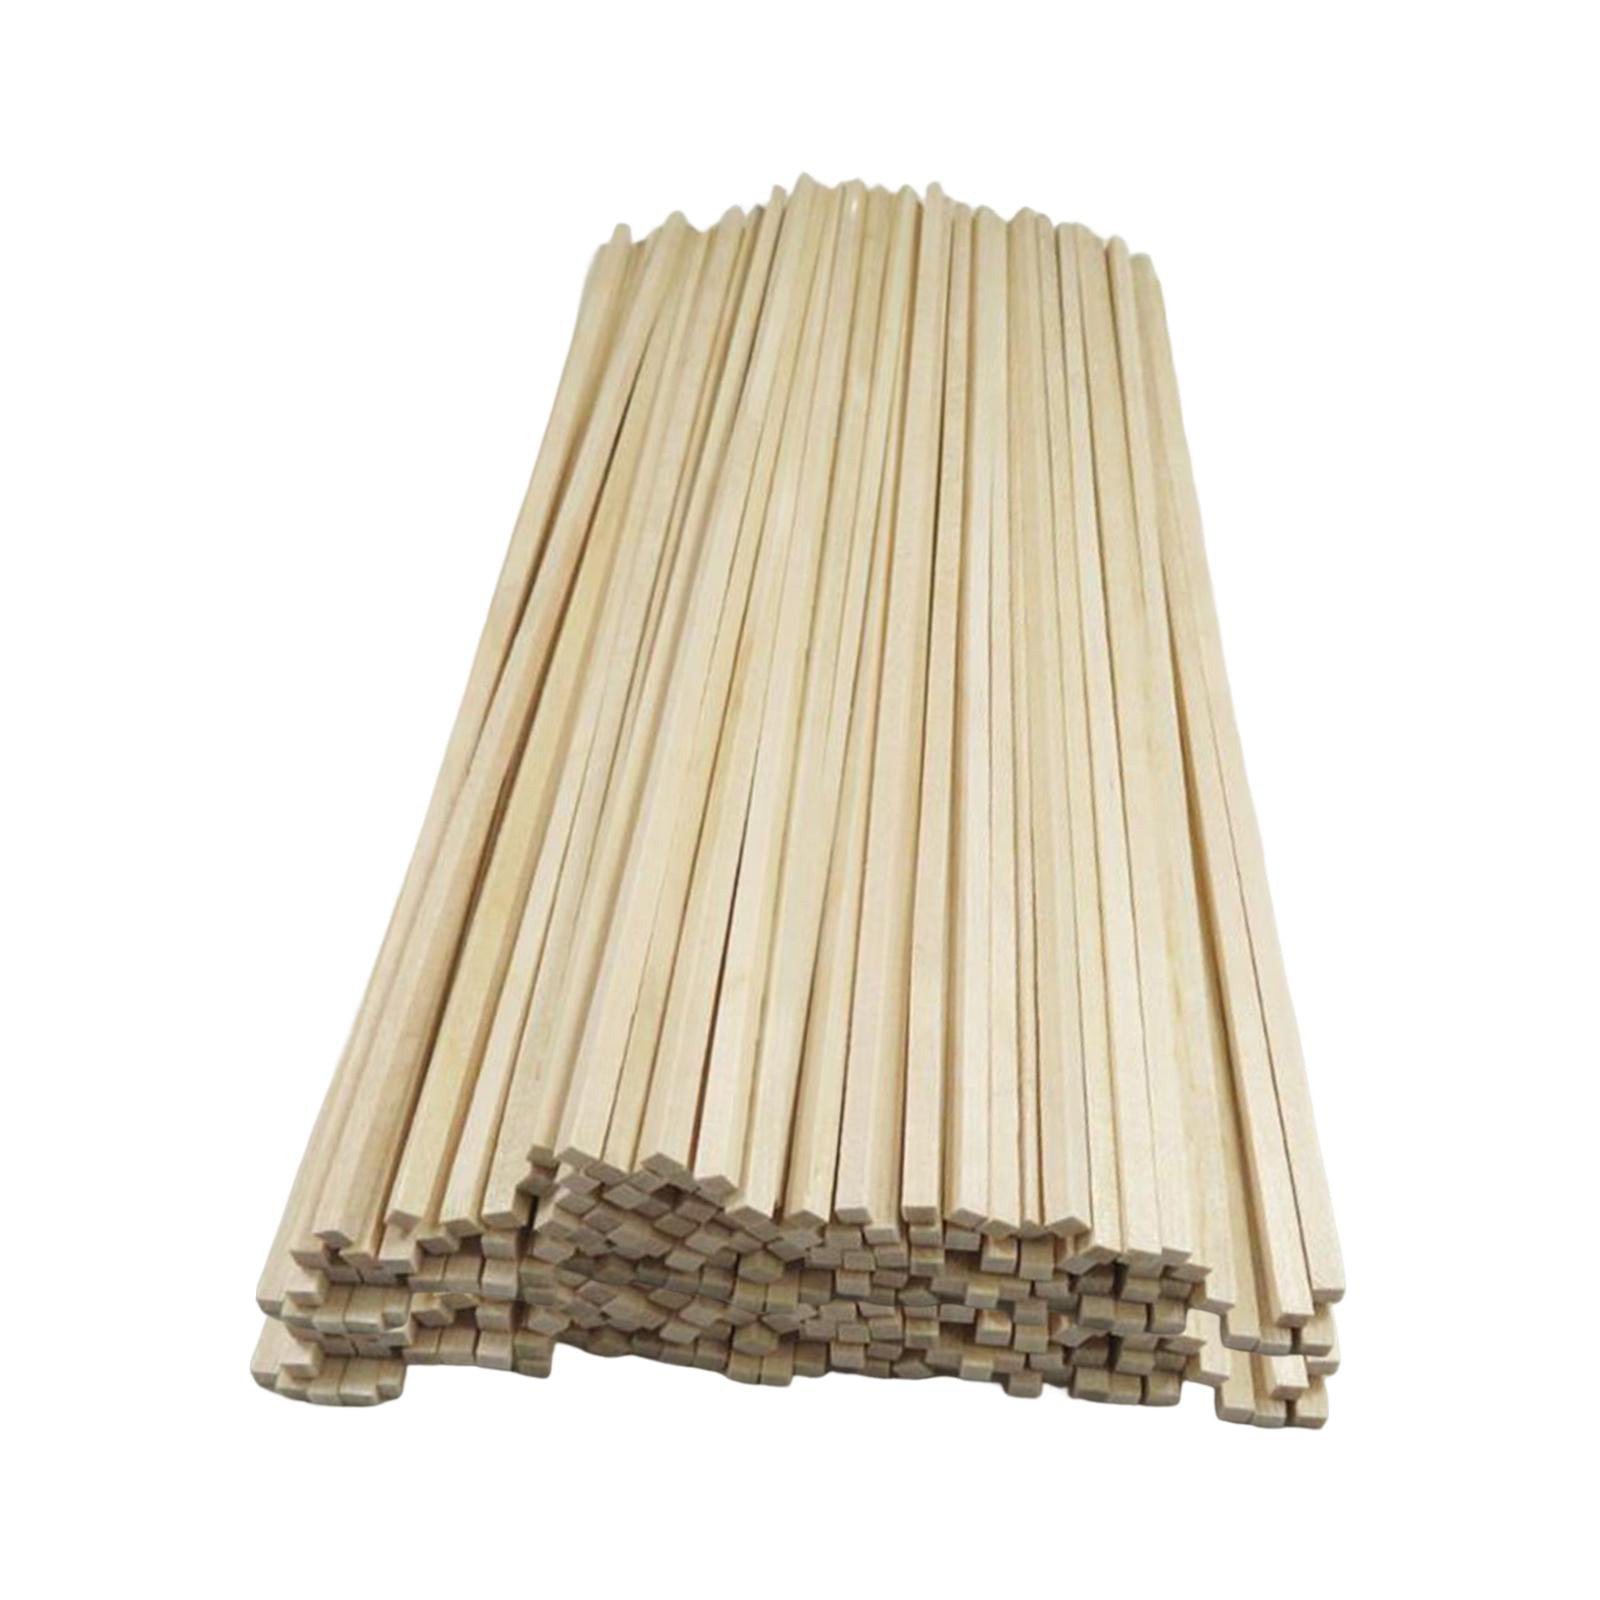 Generic 100 Pieces Unfinished Wood Sticks For Crafts Home